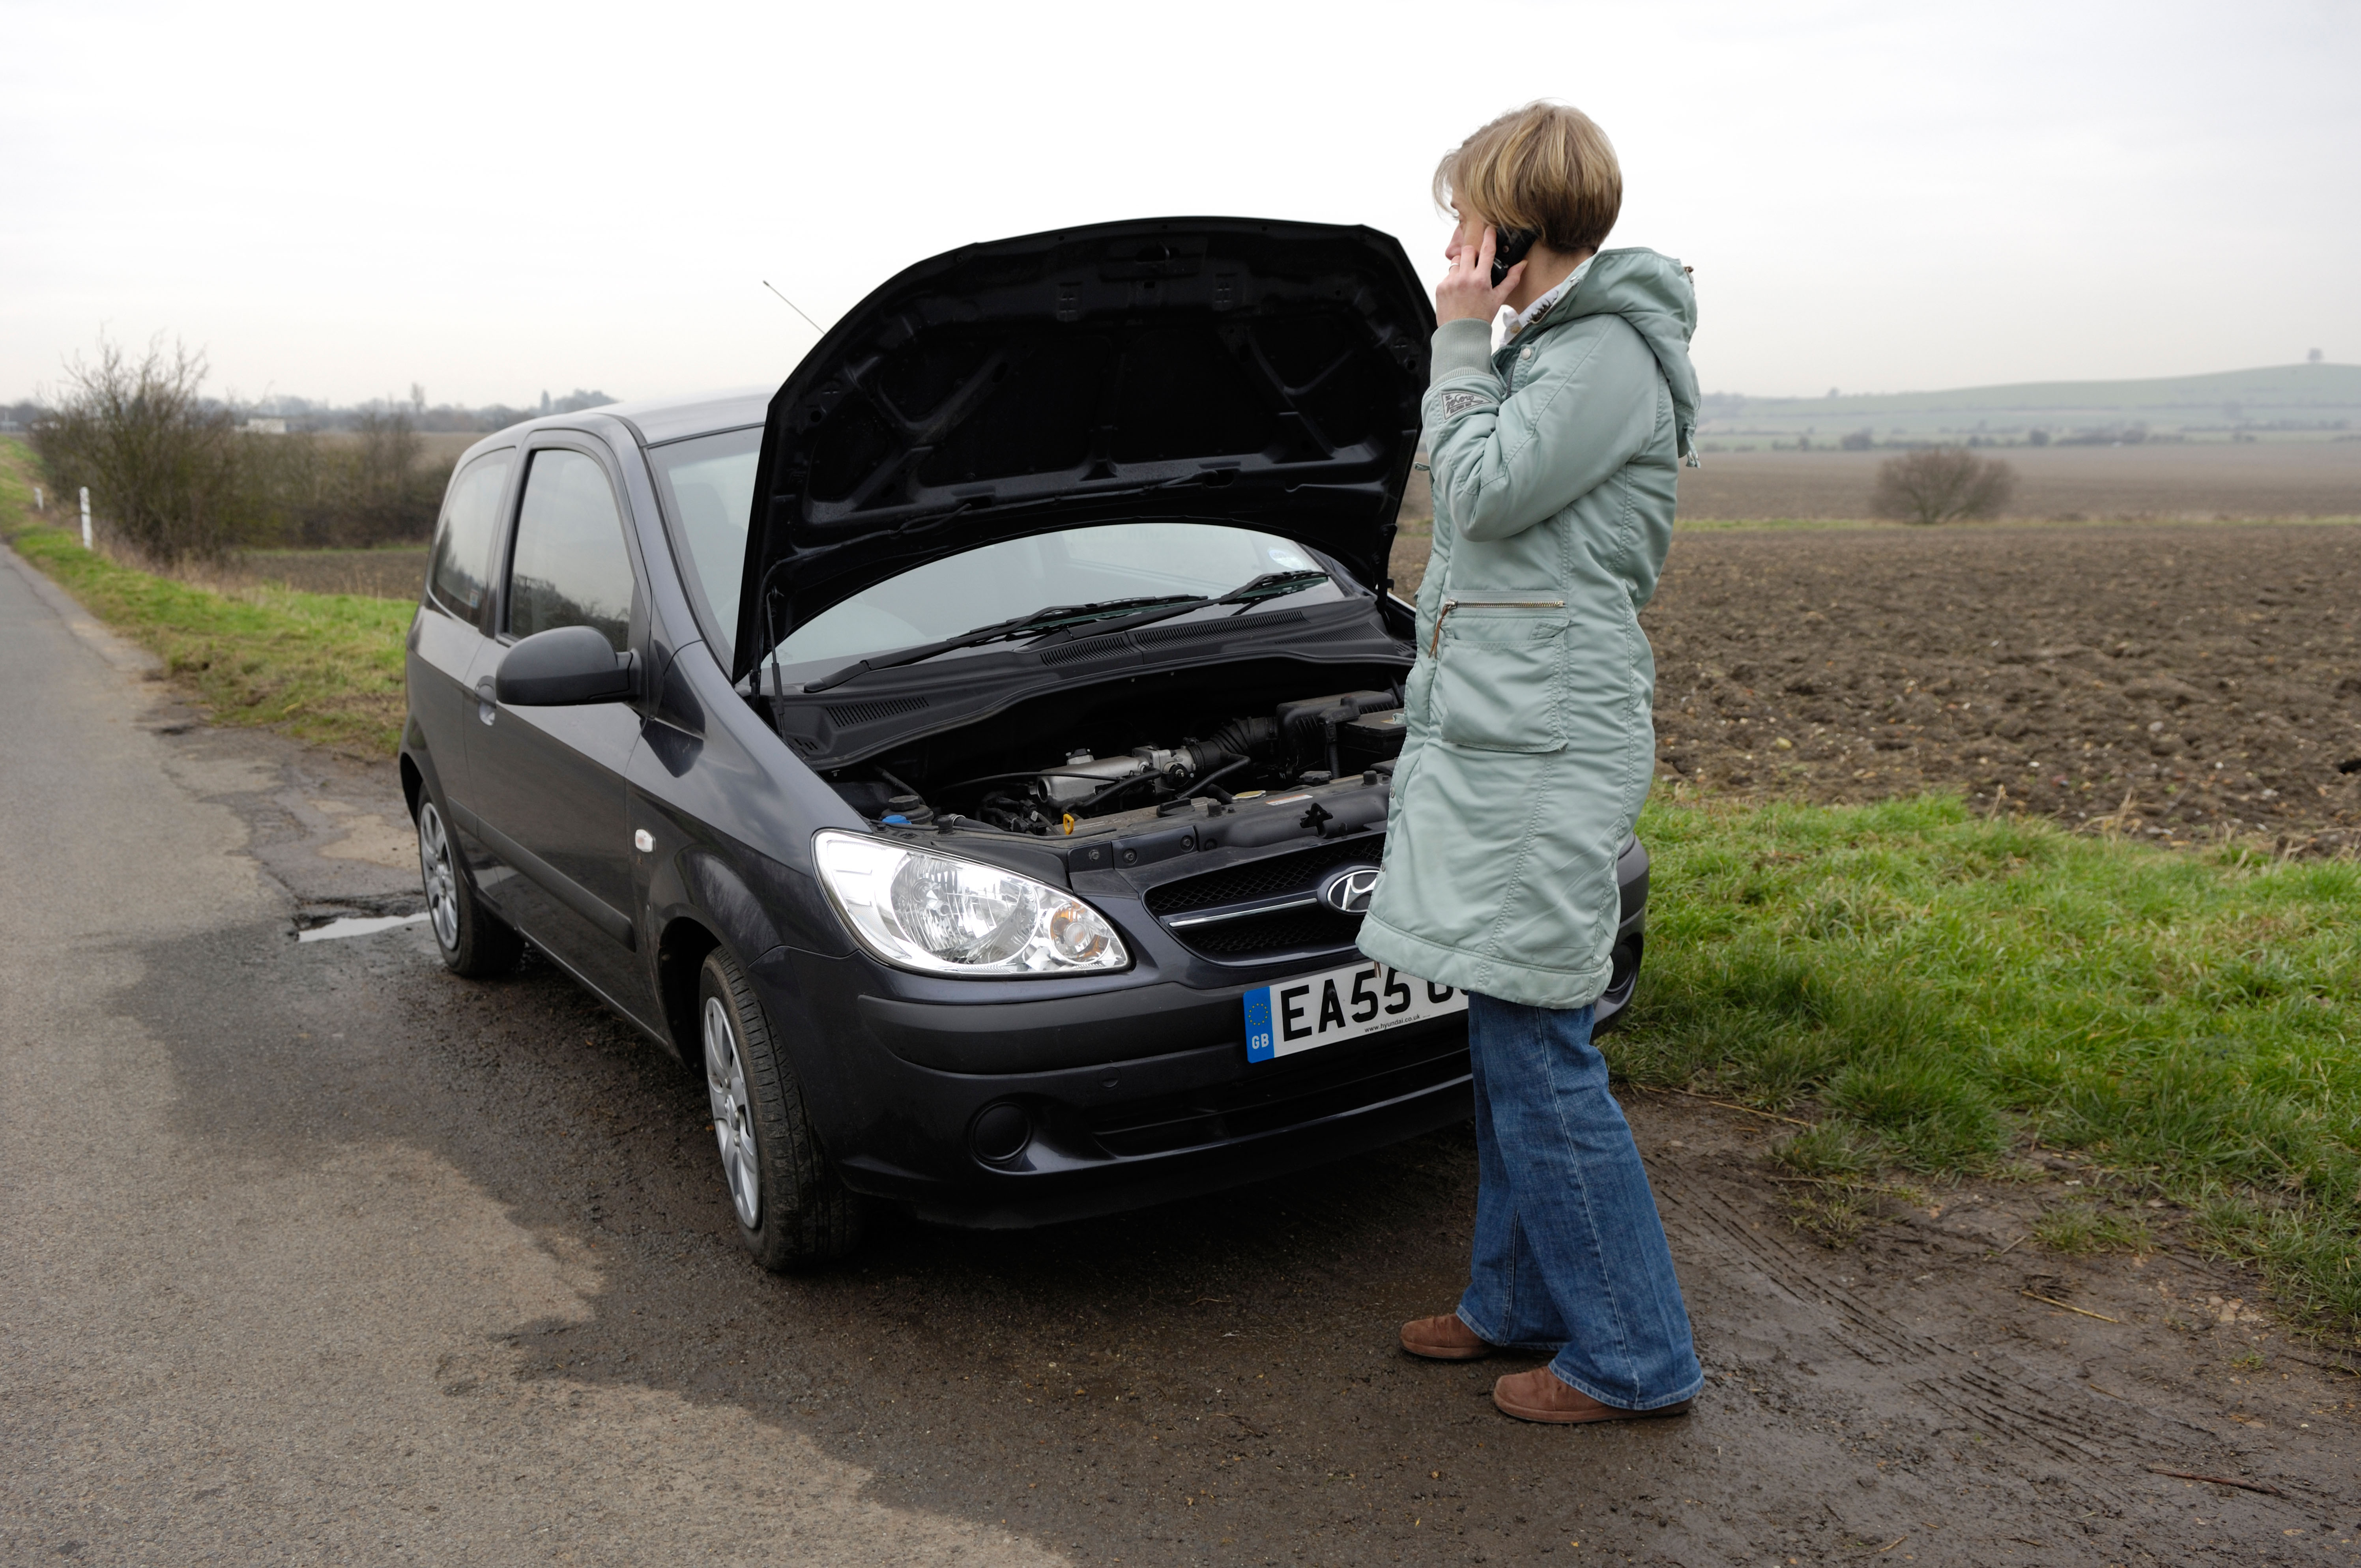 A mechanic has revealed an easy 'trick' to make it home when your car breaks down